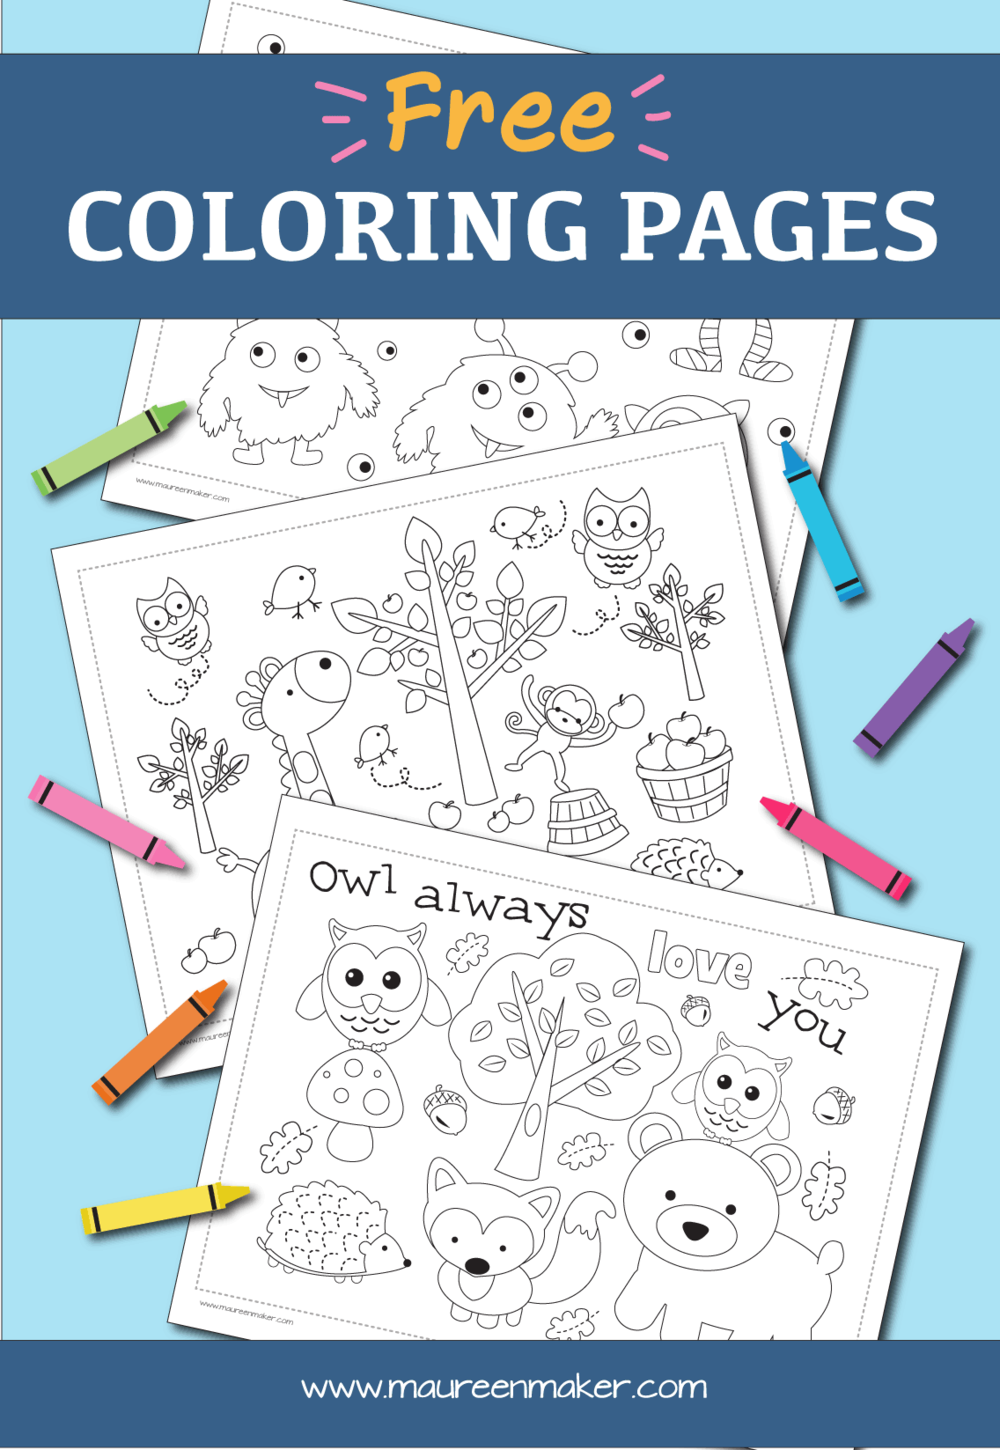 Free Coloring Pages for Kids — Maureen Maker   Surface Pattern ...